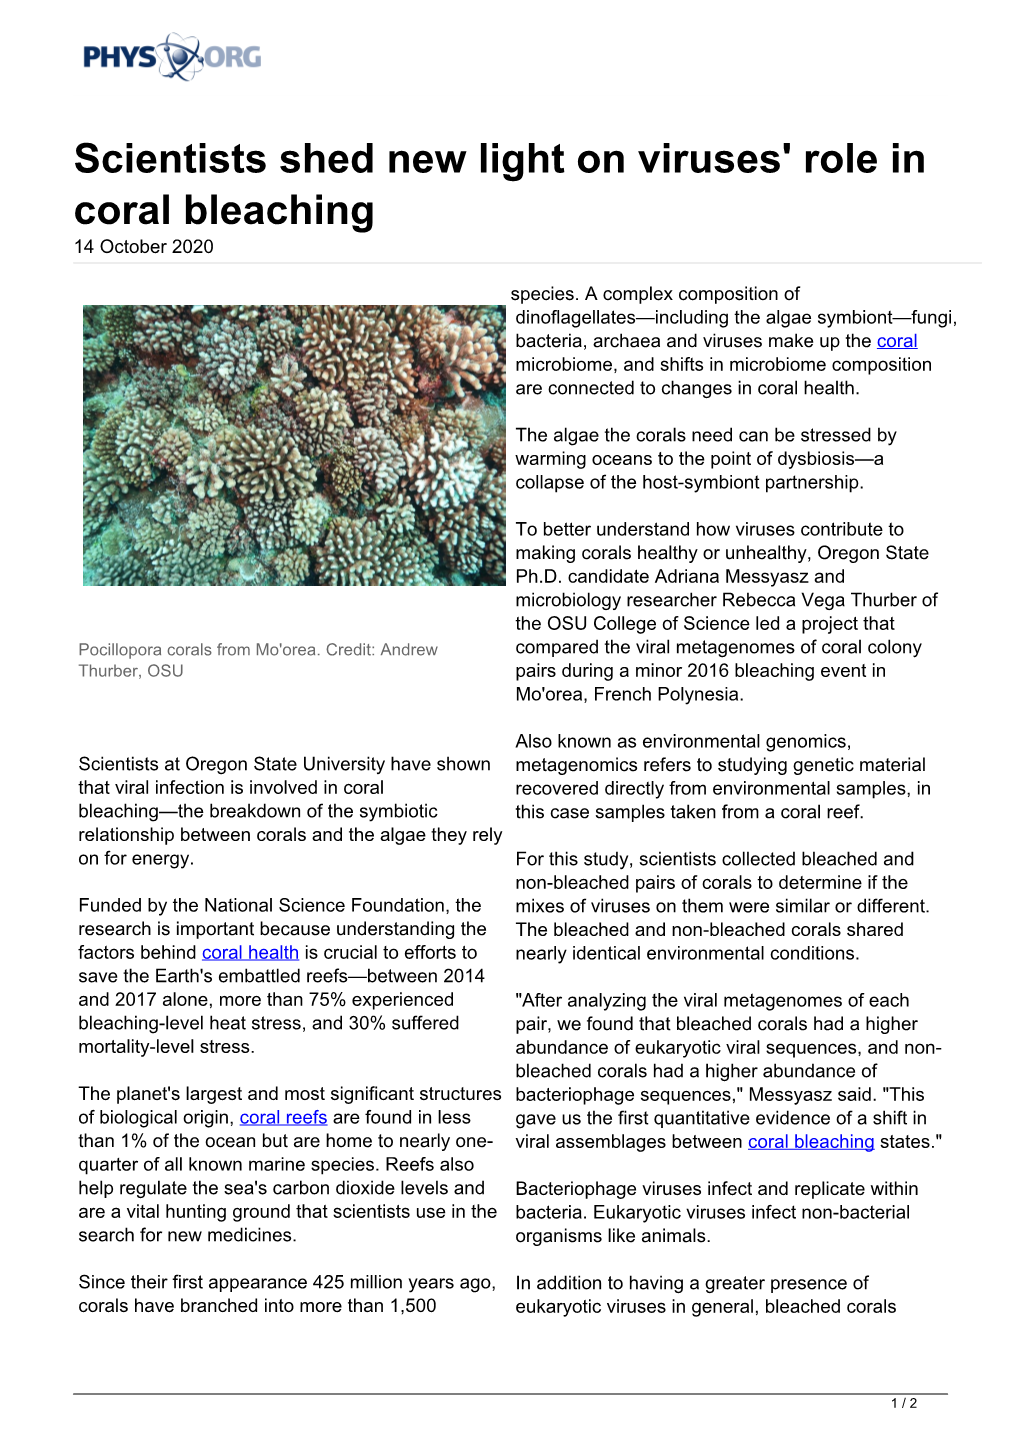 Scientists Shed New Light on Viruses' Role in Coral Bleaching 14 October 2020